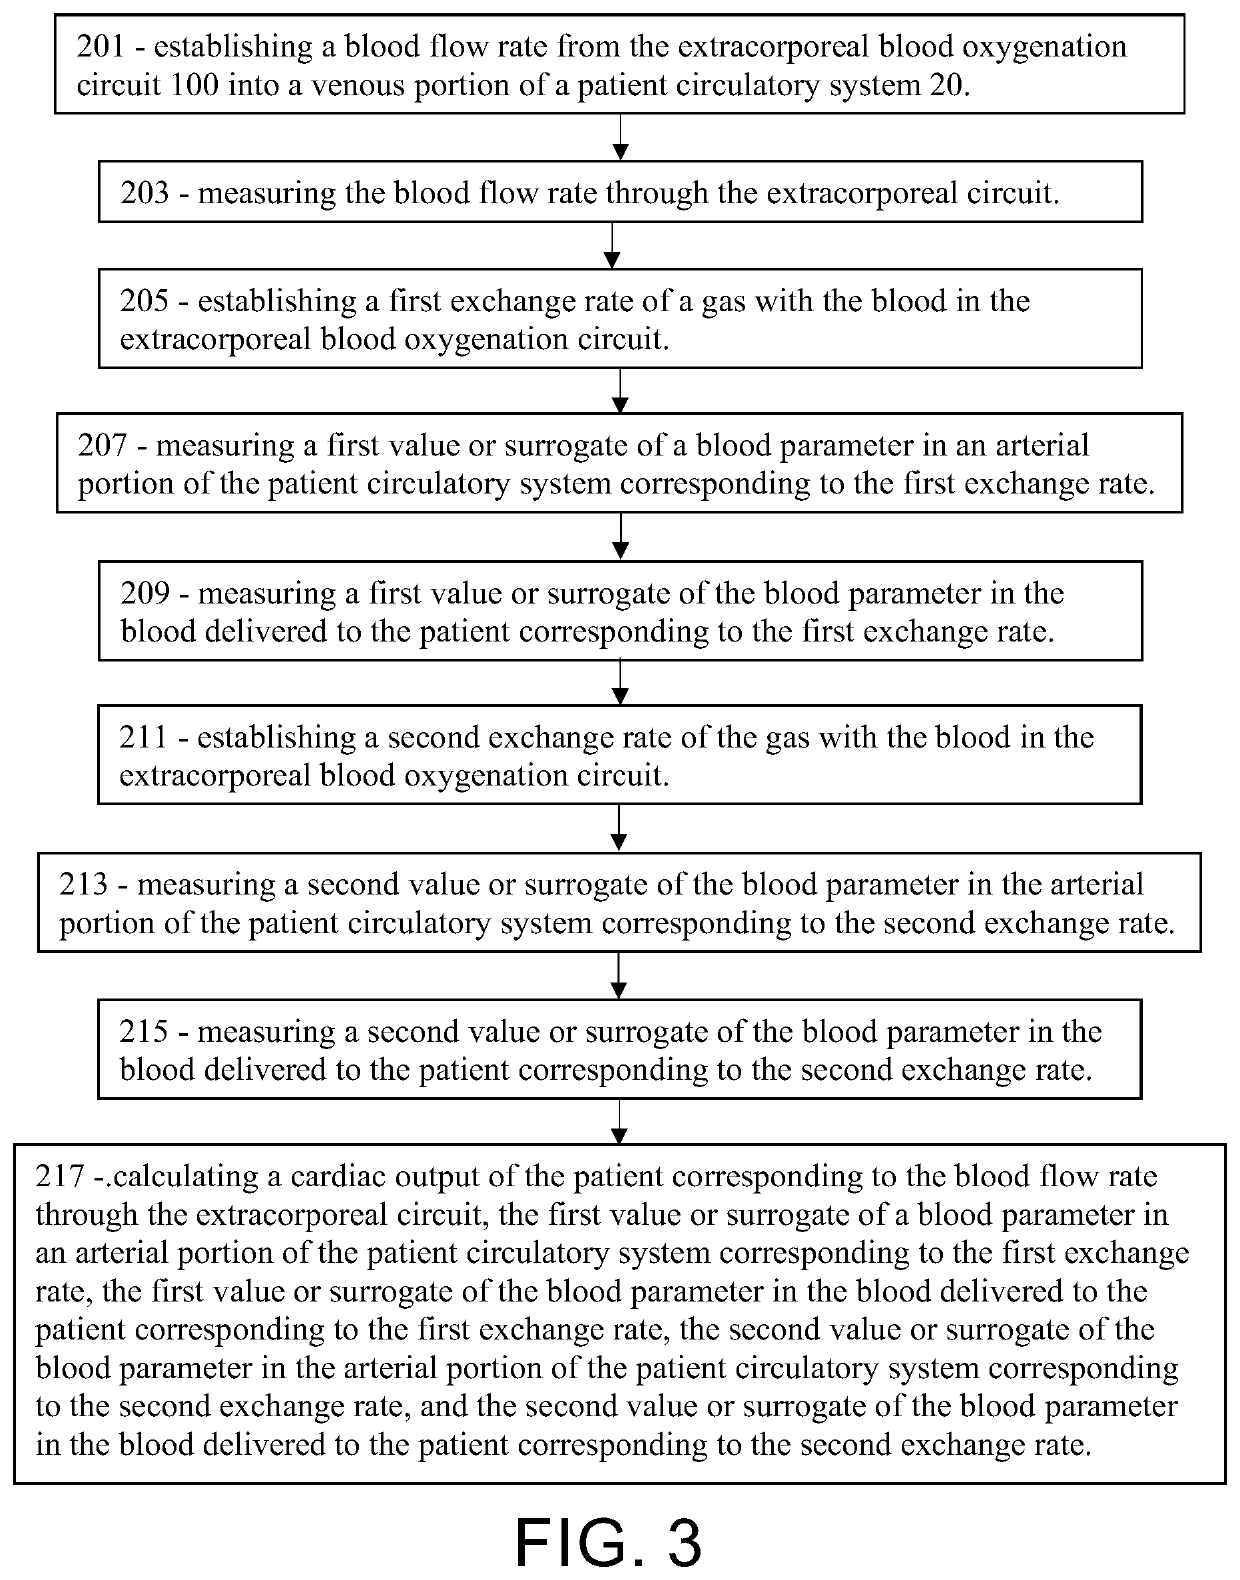 Calculating cardiac output of a patient undergoing veno-venous extracorporeal blood oxygenation